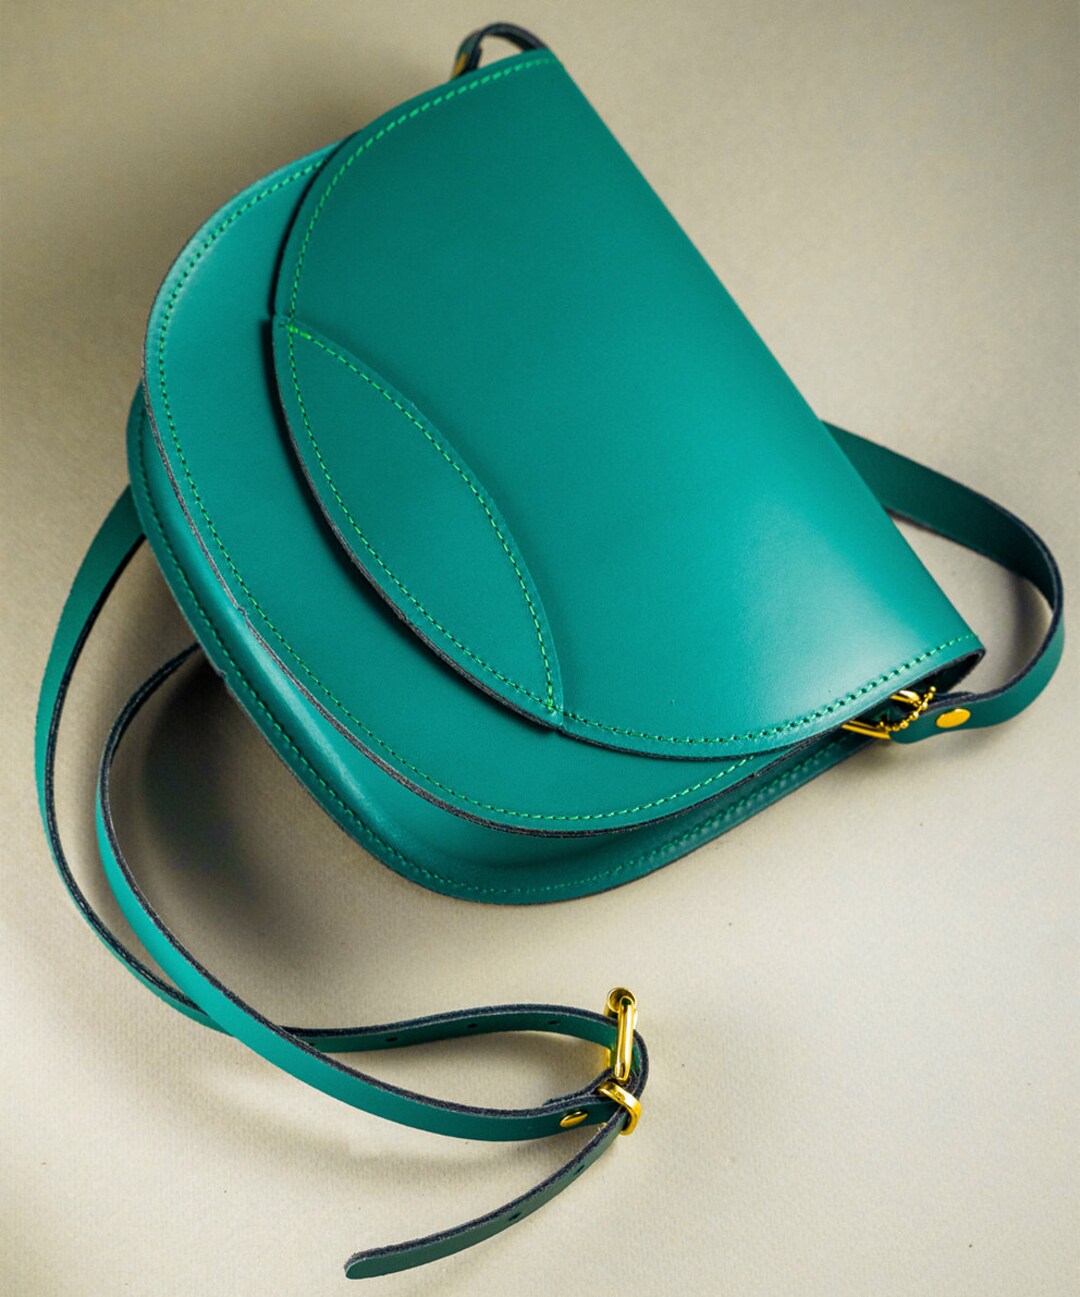 Green Women Leather Bag, Genuine Leather Saddle Bag, Classic Style Bag ...